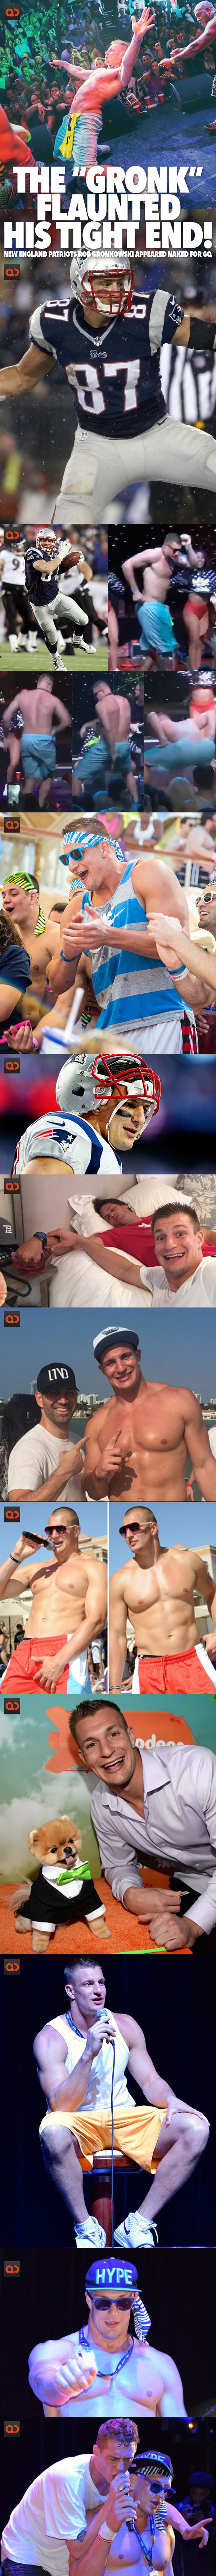 qc-rob_gronkowski_flounted_his_tight_end_on_gq-collage01